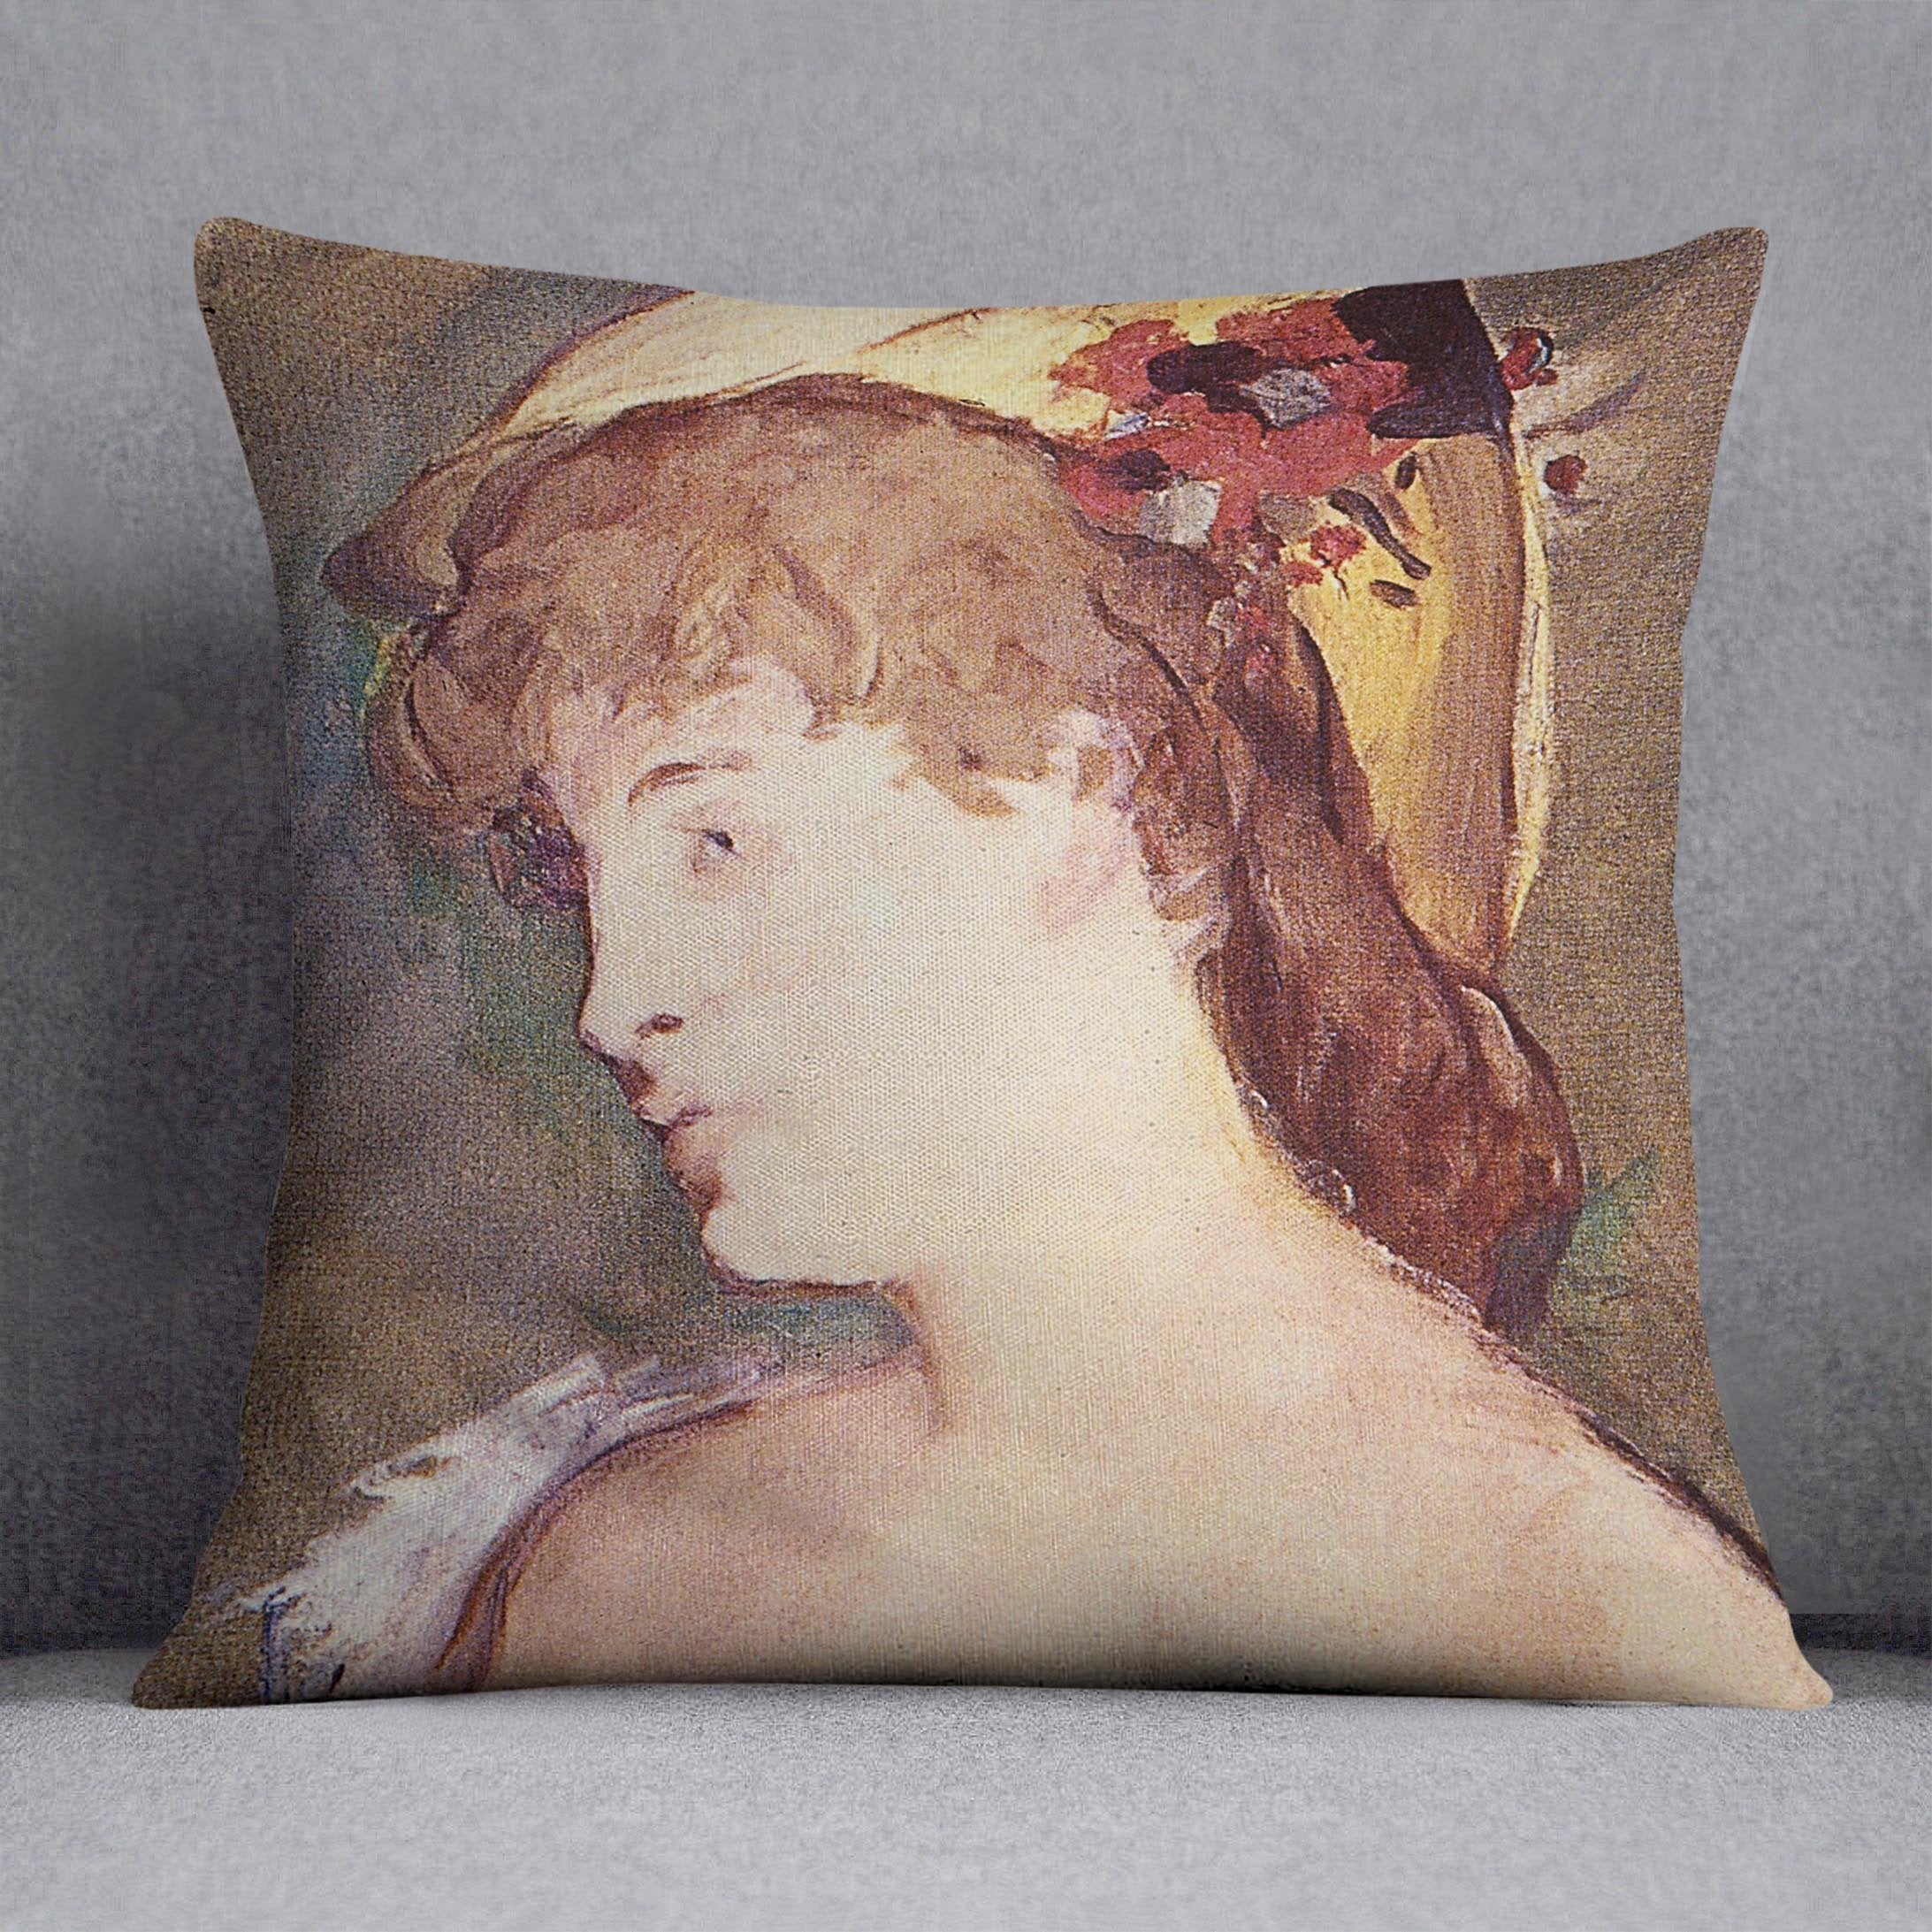 The Blond Nude by Manet Throw Pillow